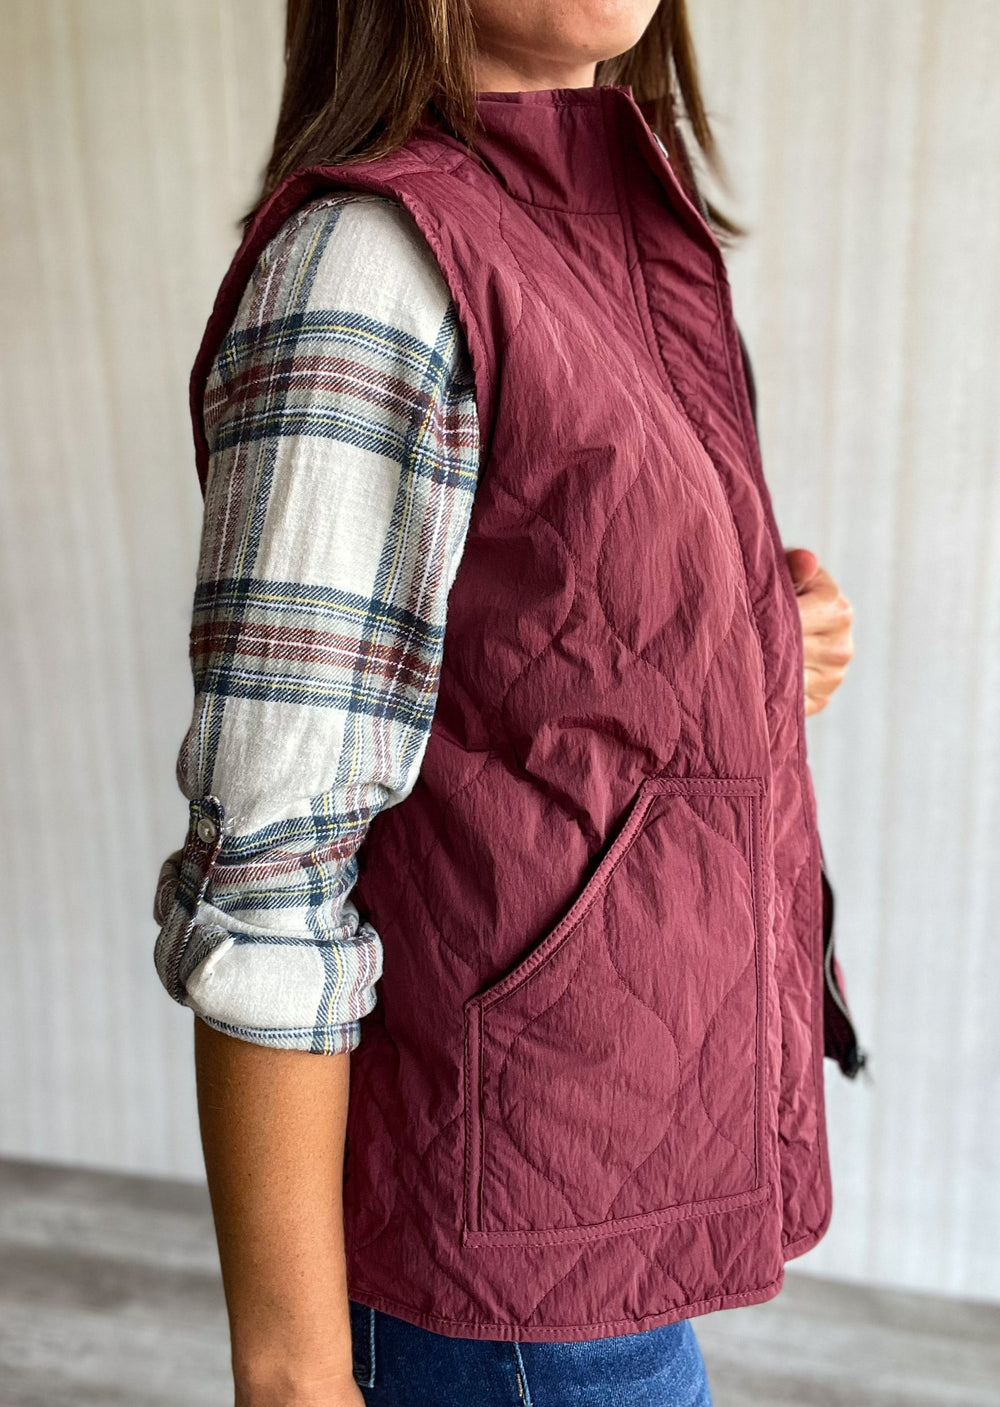 Maroon Burgundy Vest styled with maroon, white and gray plaid top and jeans. Thread and Supply Brand.